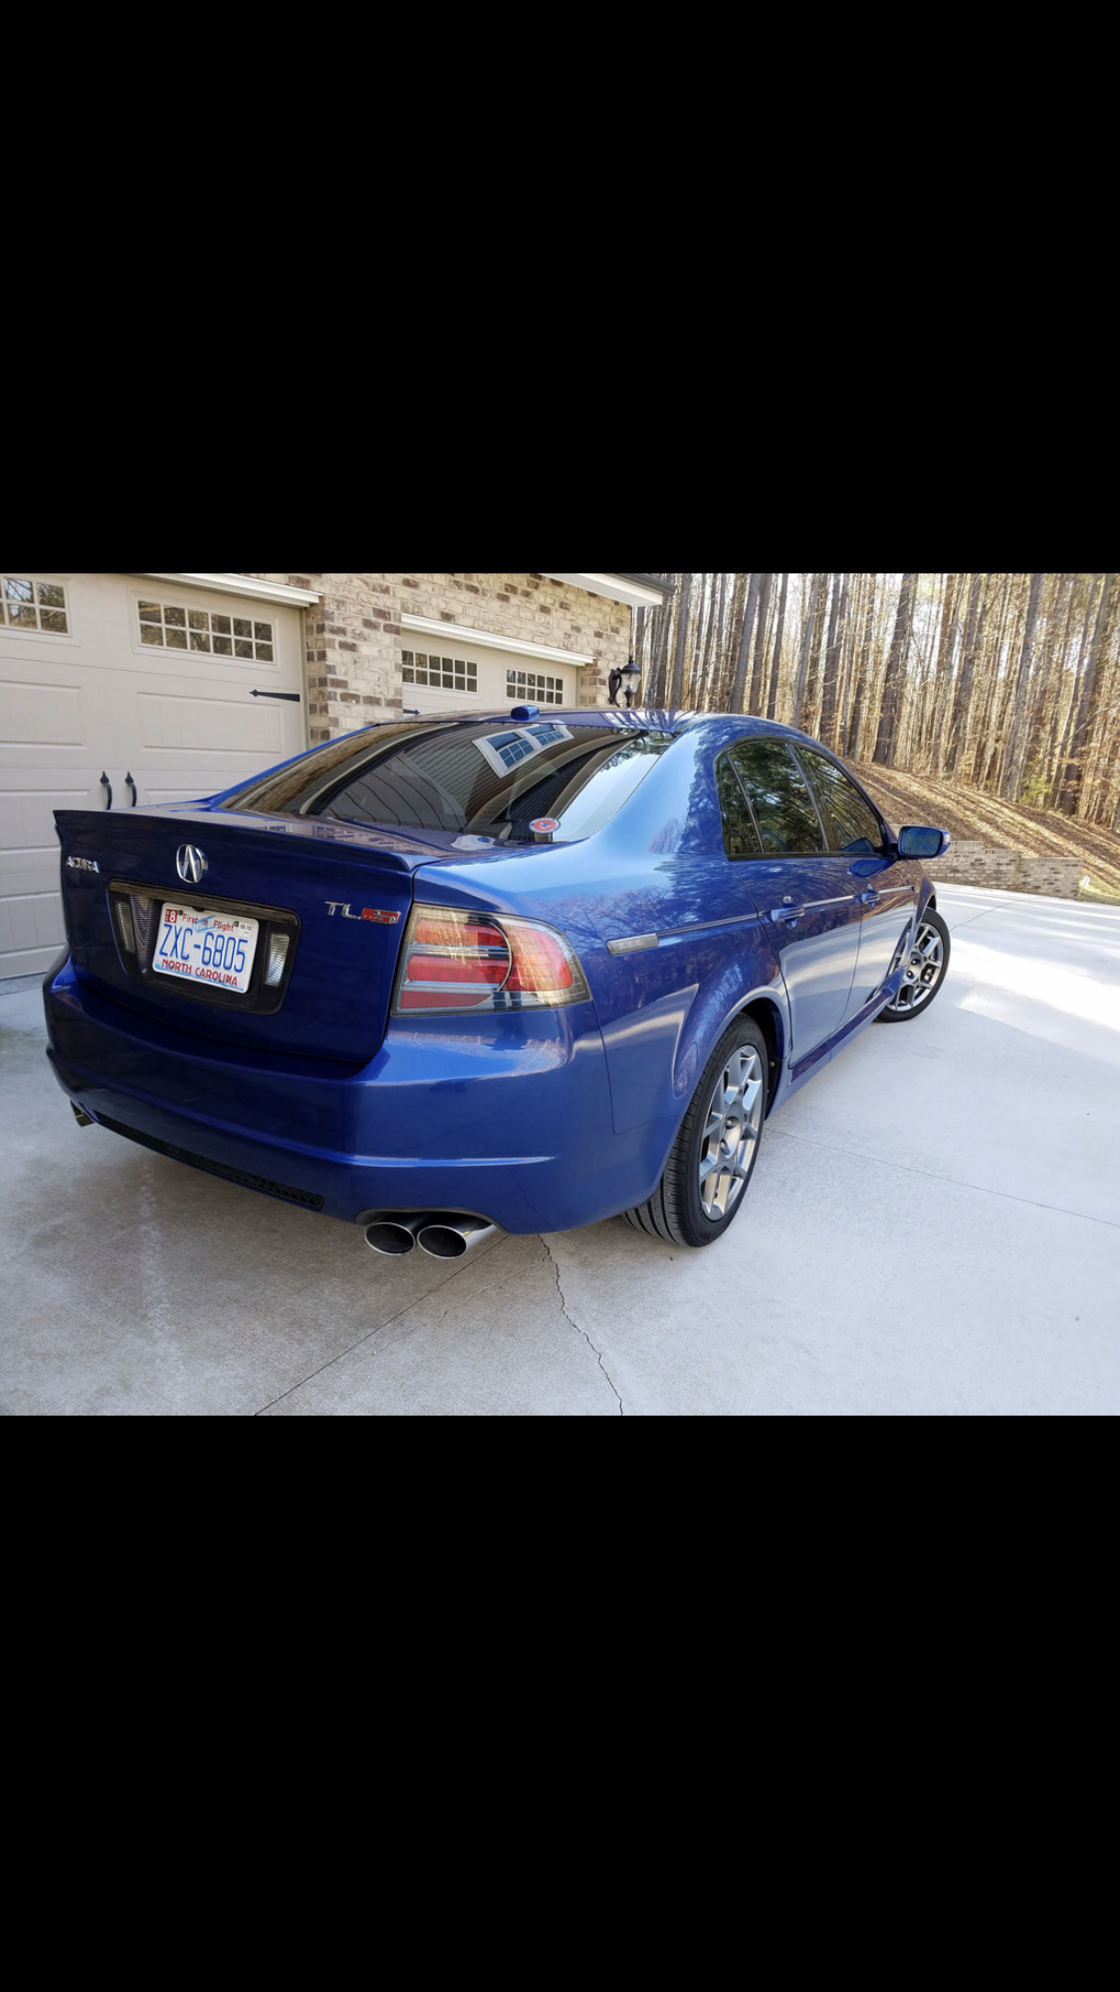 2007 Acura TL - CLOSED: 2007 Acura TL Type S Kinetic Blue Pearl (KBP) 156,xxx - Used - VIN 19UUA75547A003999 - 2WD - Manual - Blue - Franklin Square, NY 11010, United States